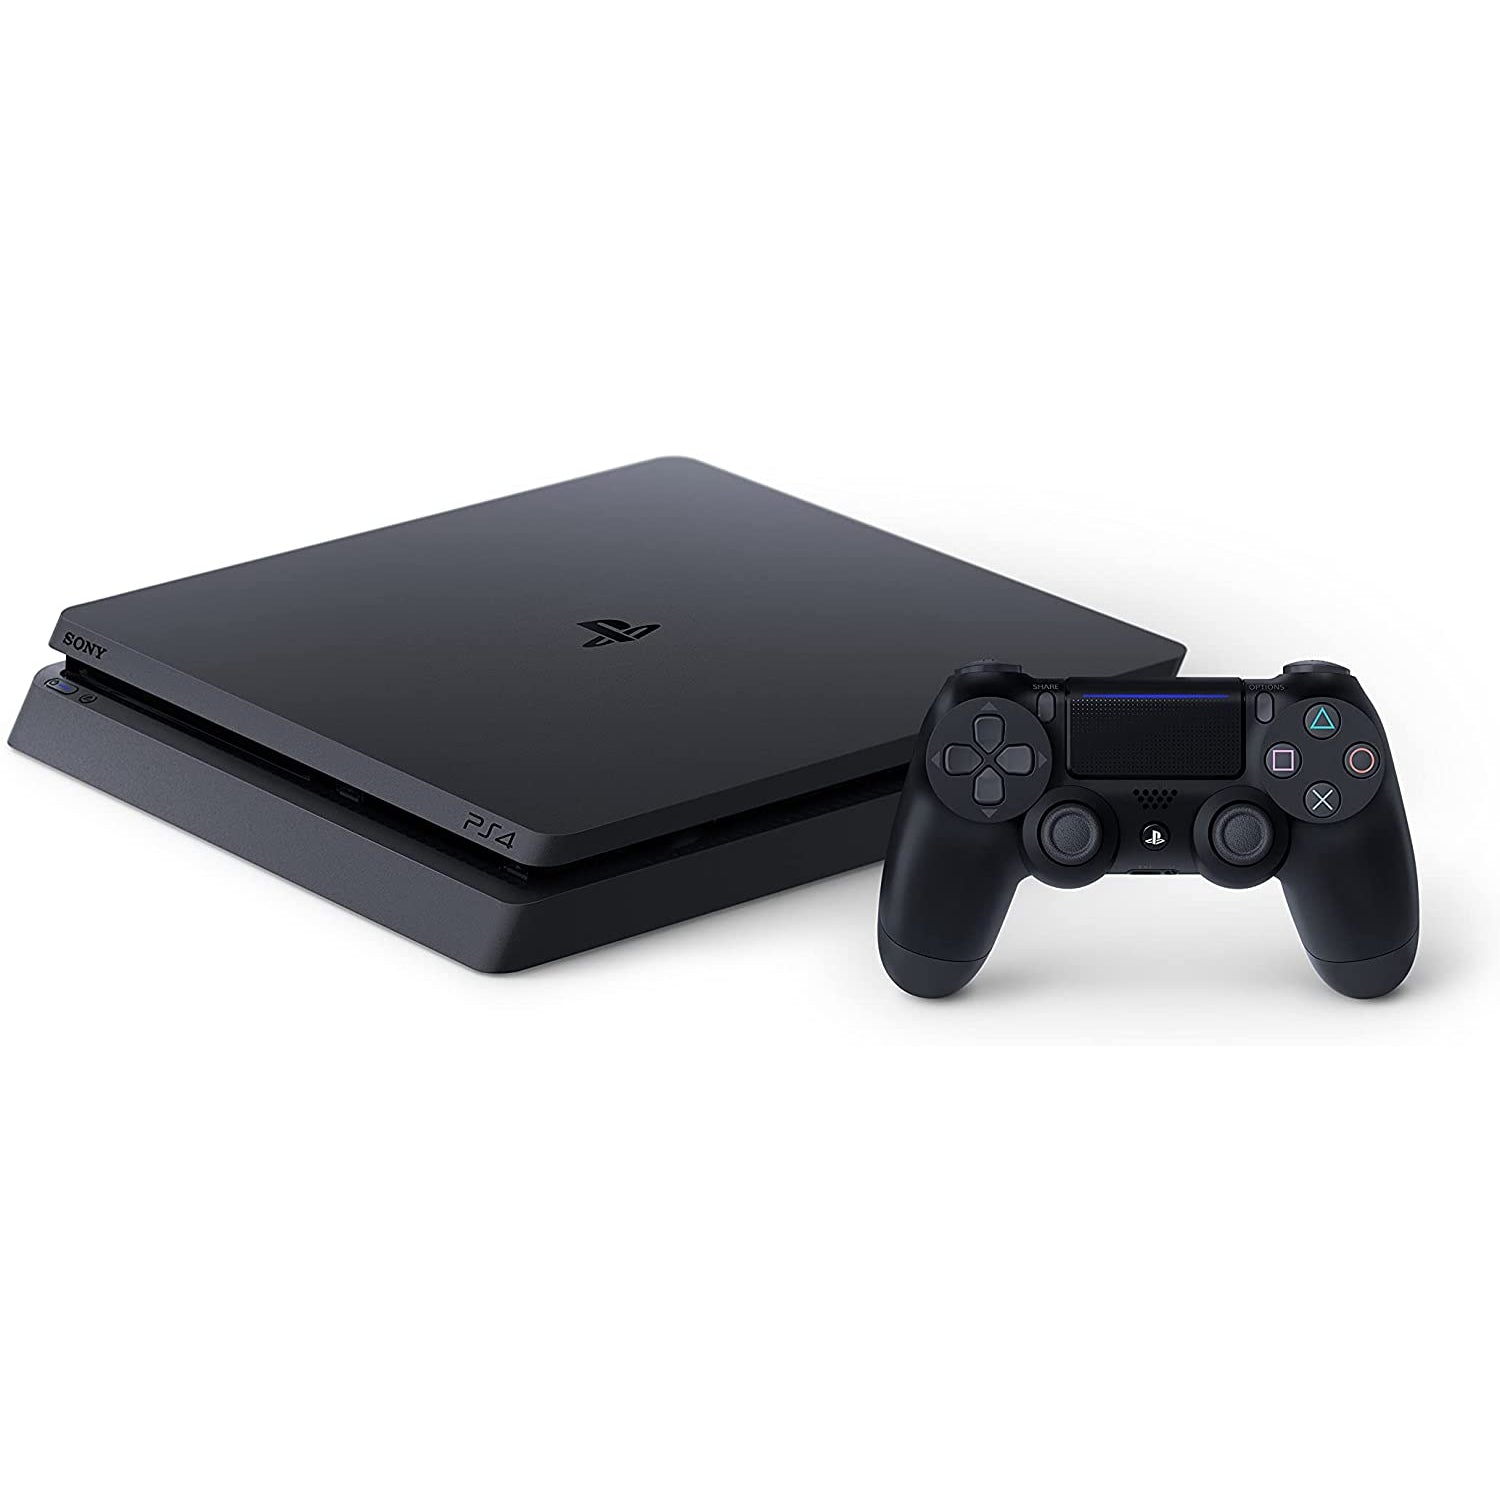 Sony PlayStation 4 Slim Console - 1TB - Refurbished Excellent